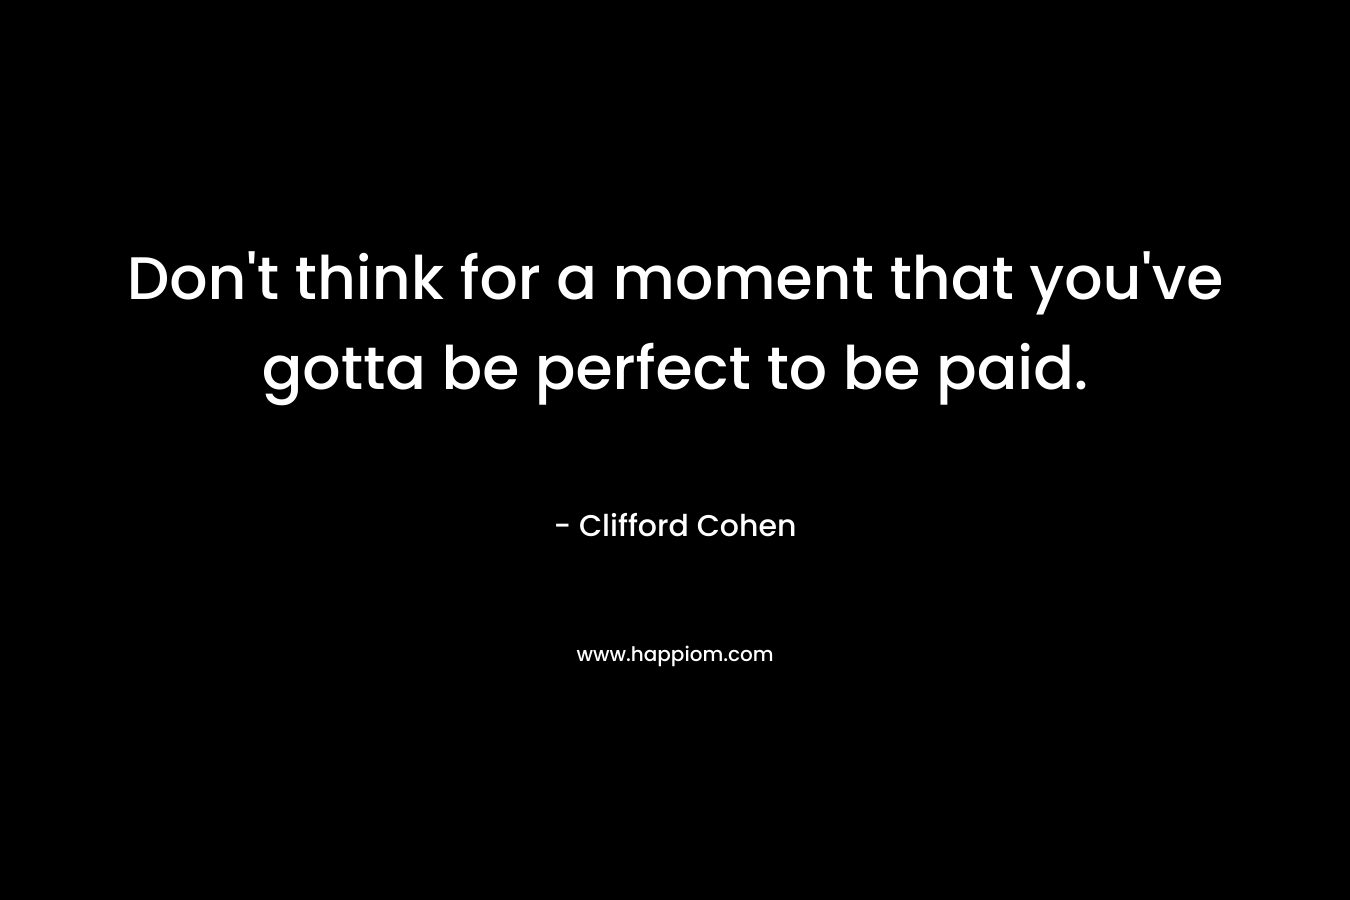 Don’t think for a moment that you’ve gotta be perfect to be paid. – Clifford Cohen